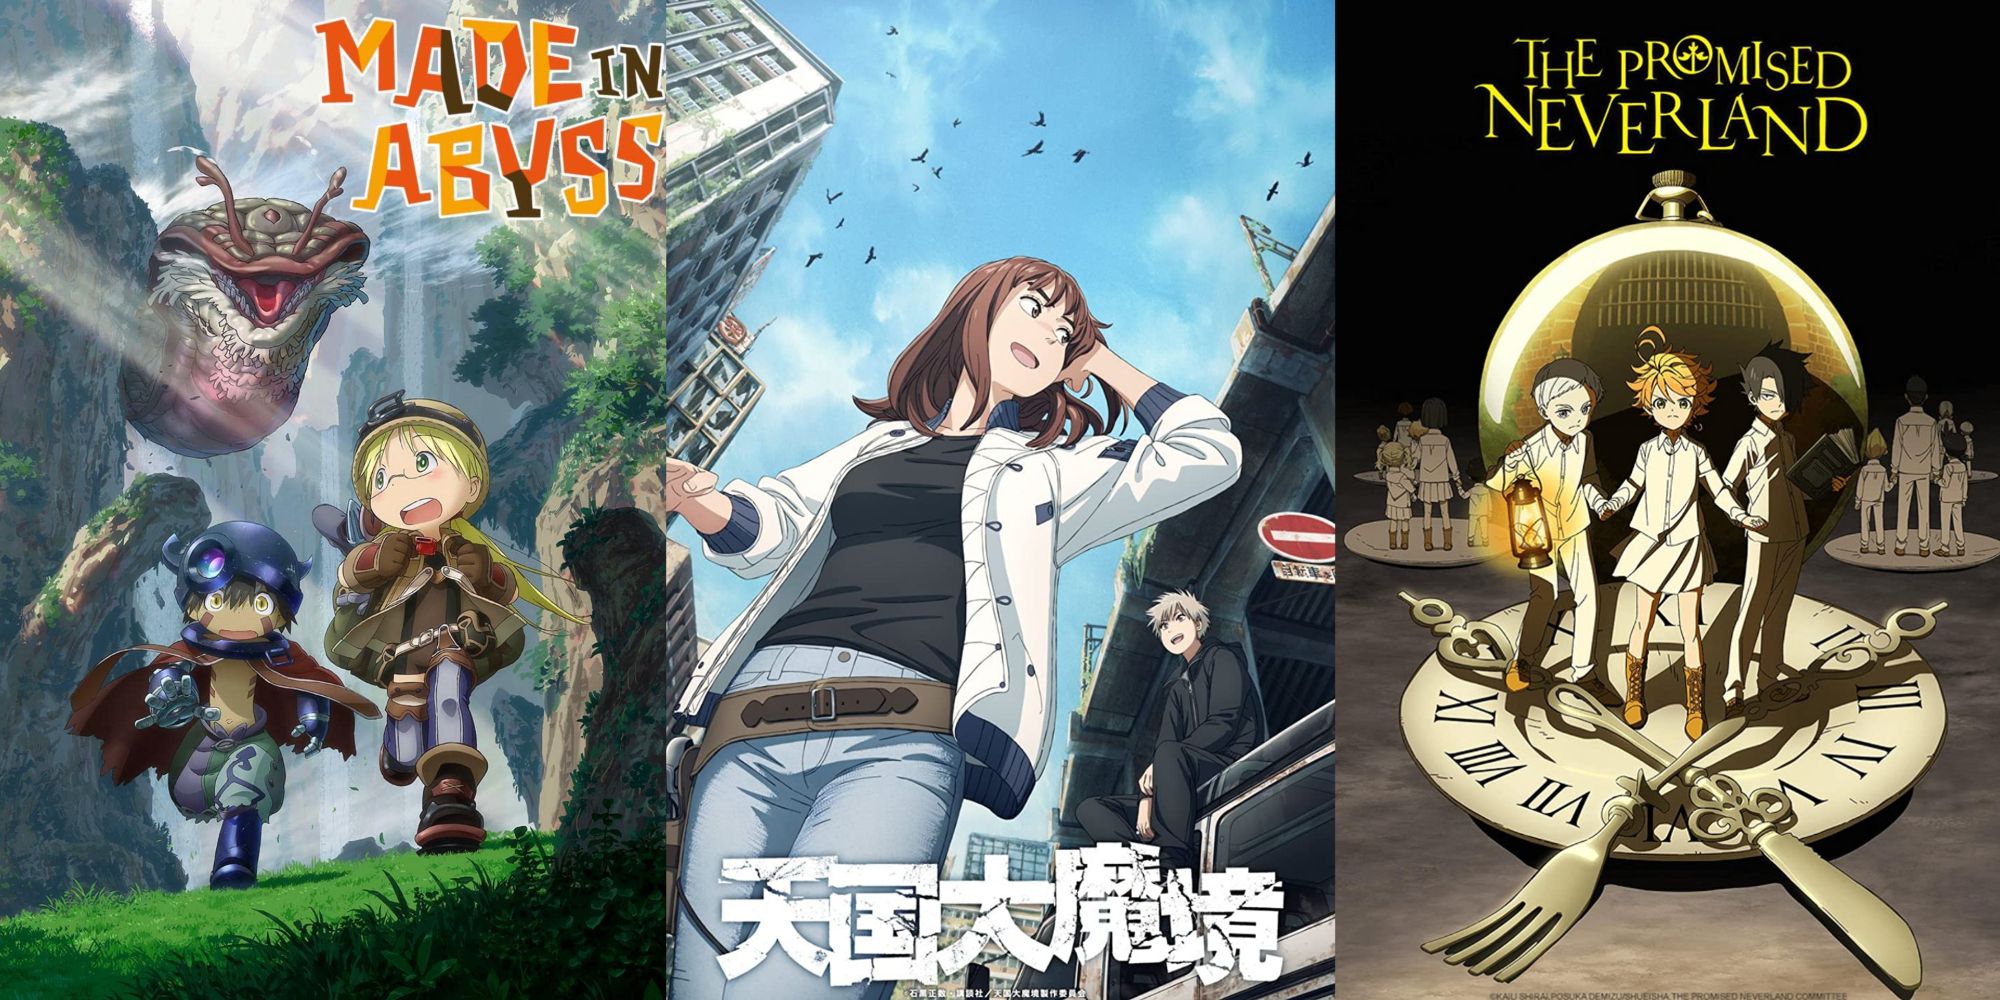 Heavenly Delusion Shows How Overseas Anime Marketing Can Be Improved